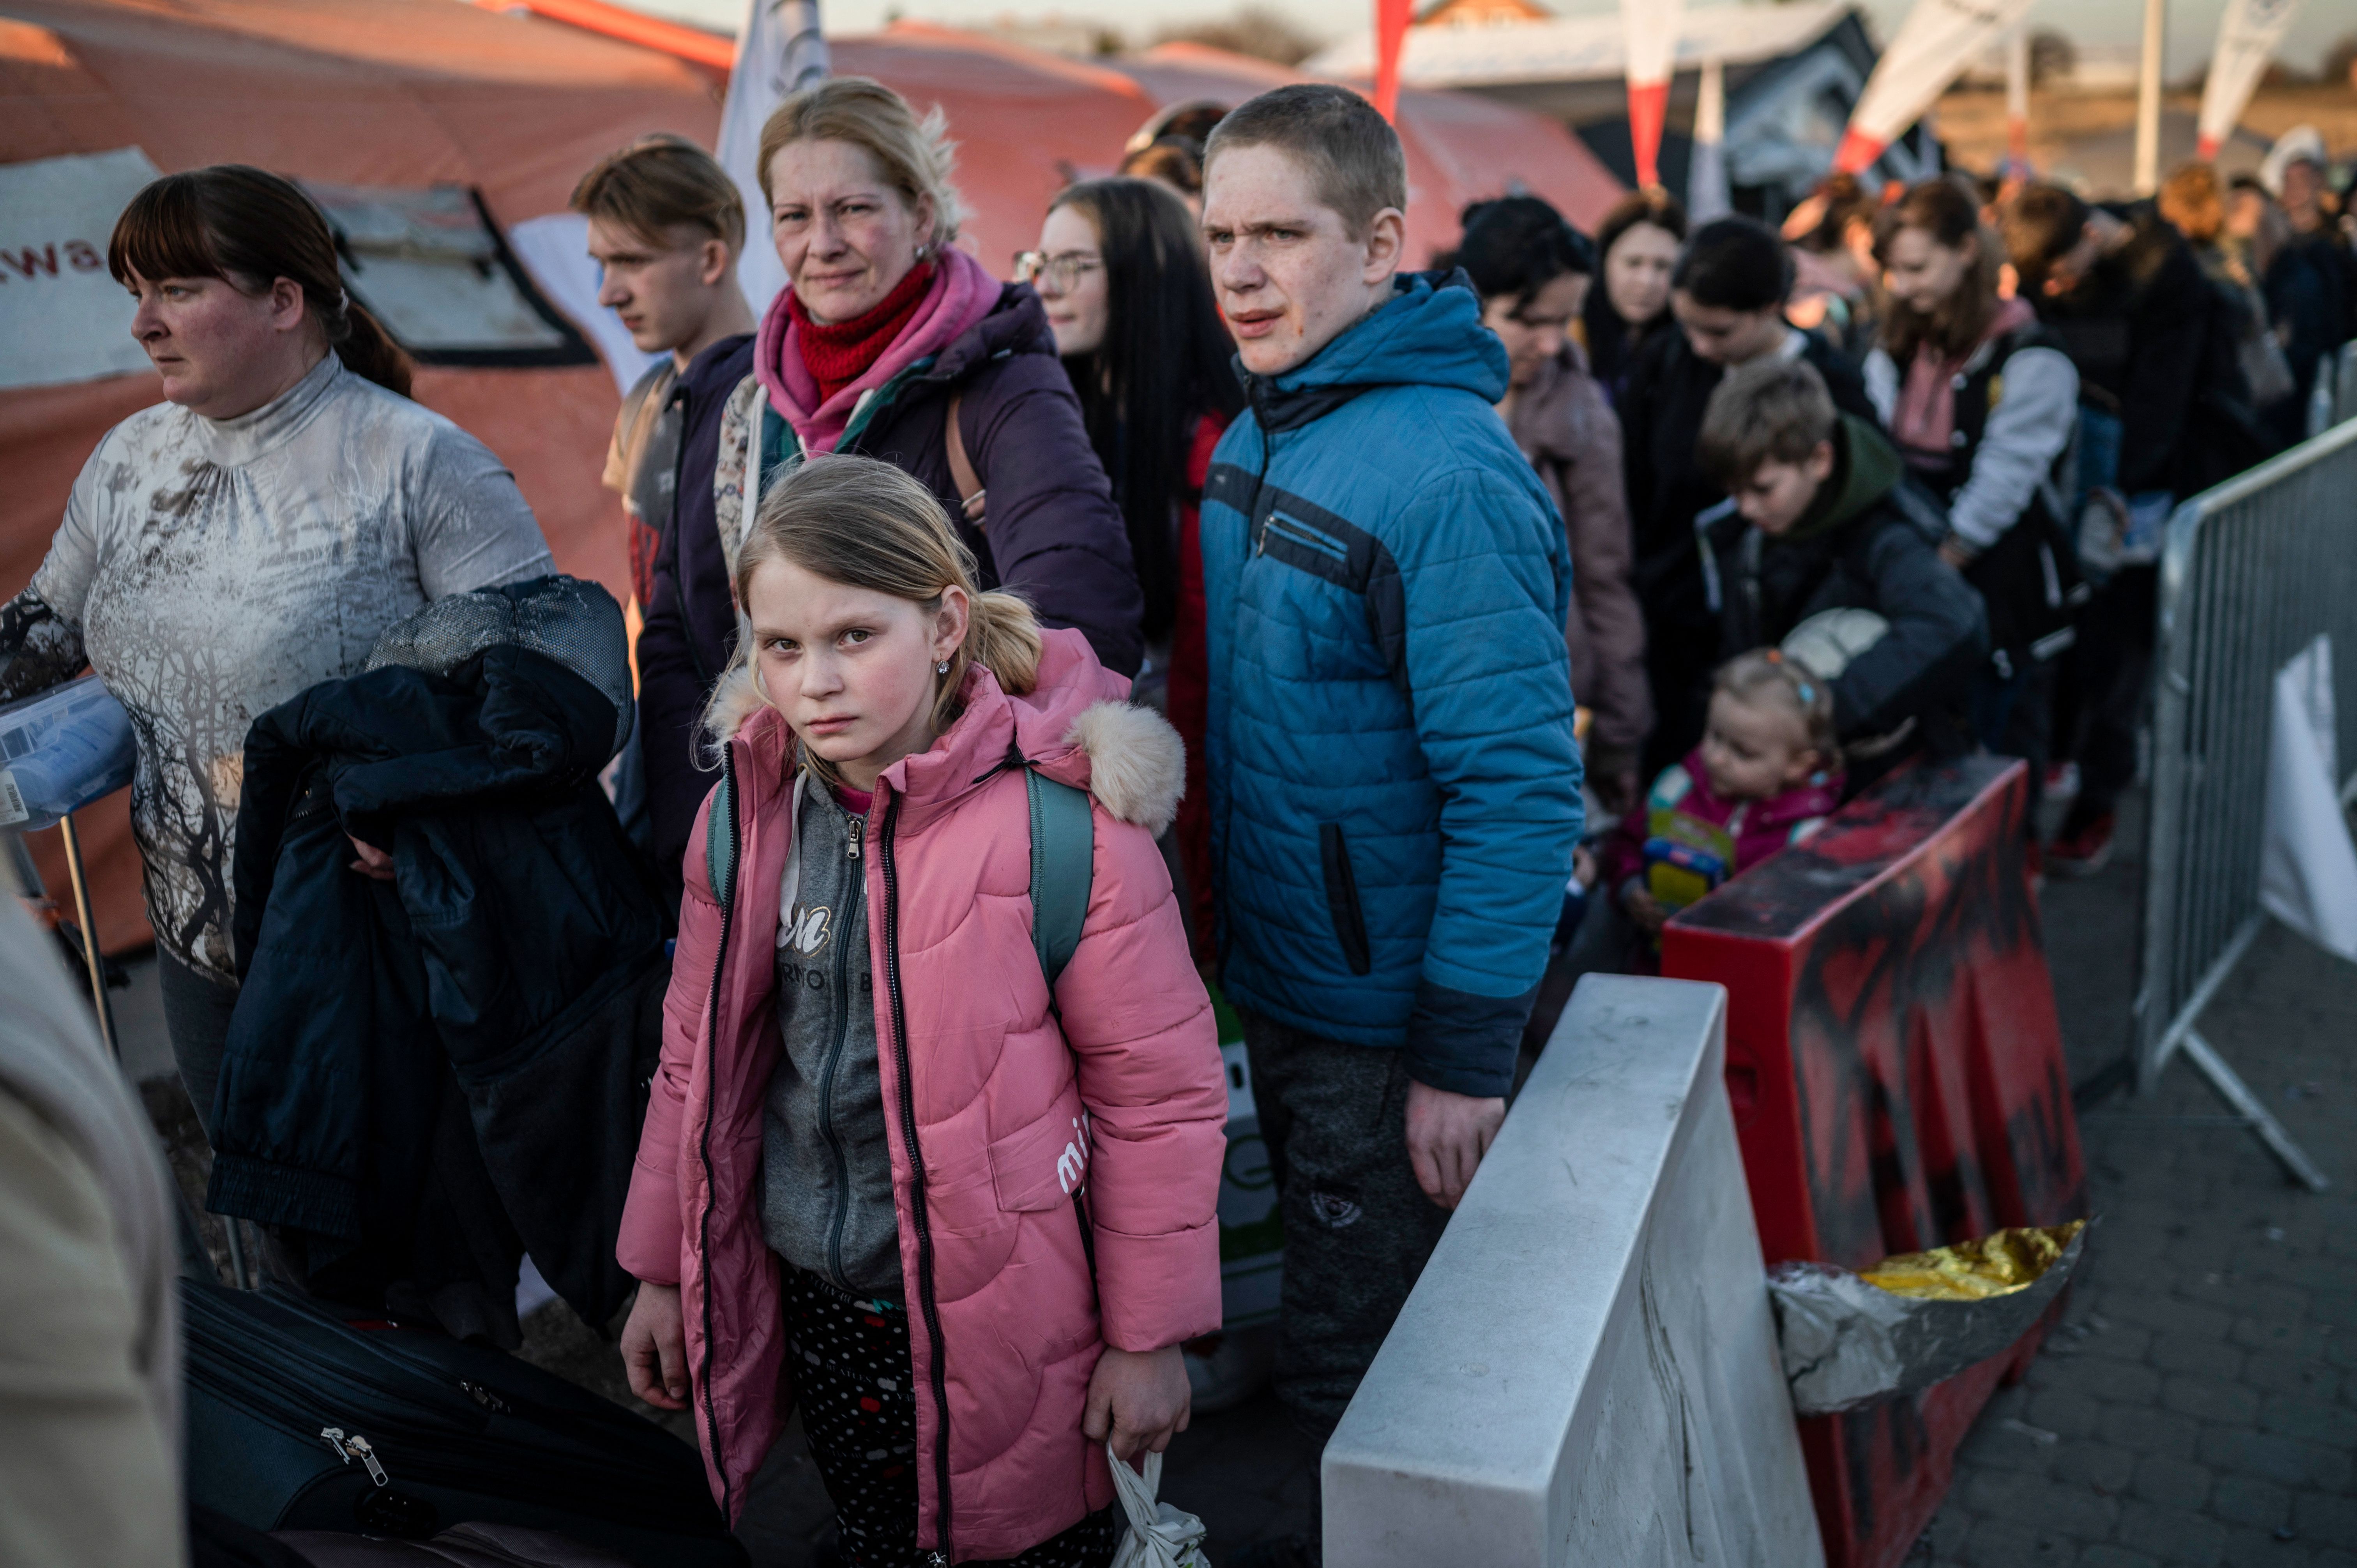 Refugees from Ukraine line up as they wait for further transport at the Medyka border crossing in southeastern Poland, on March 23.